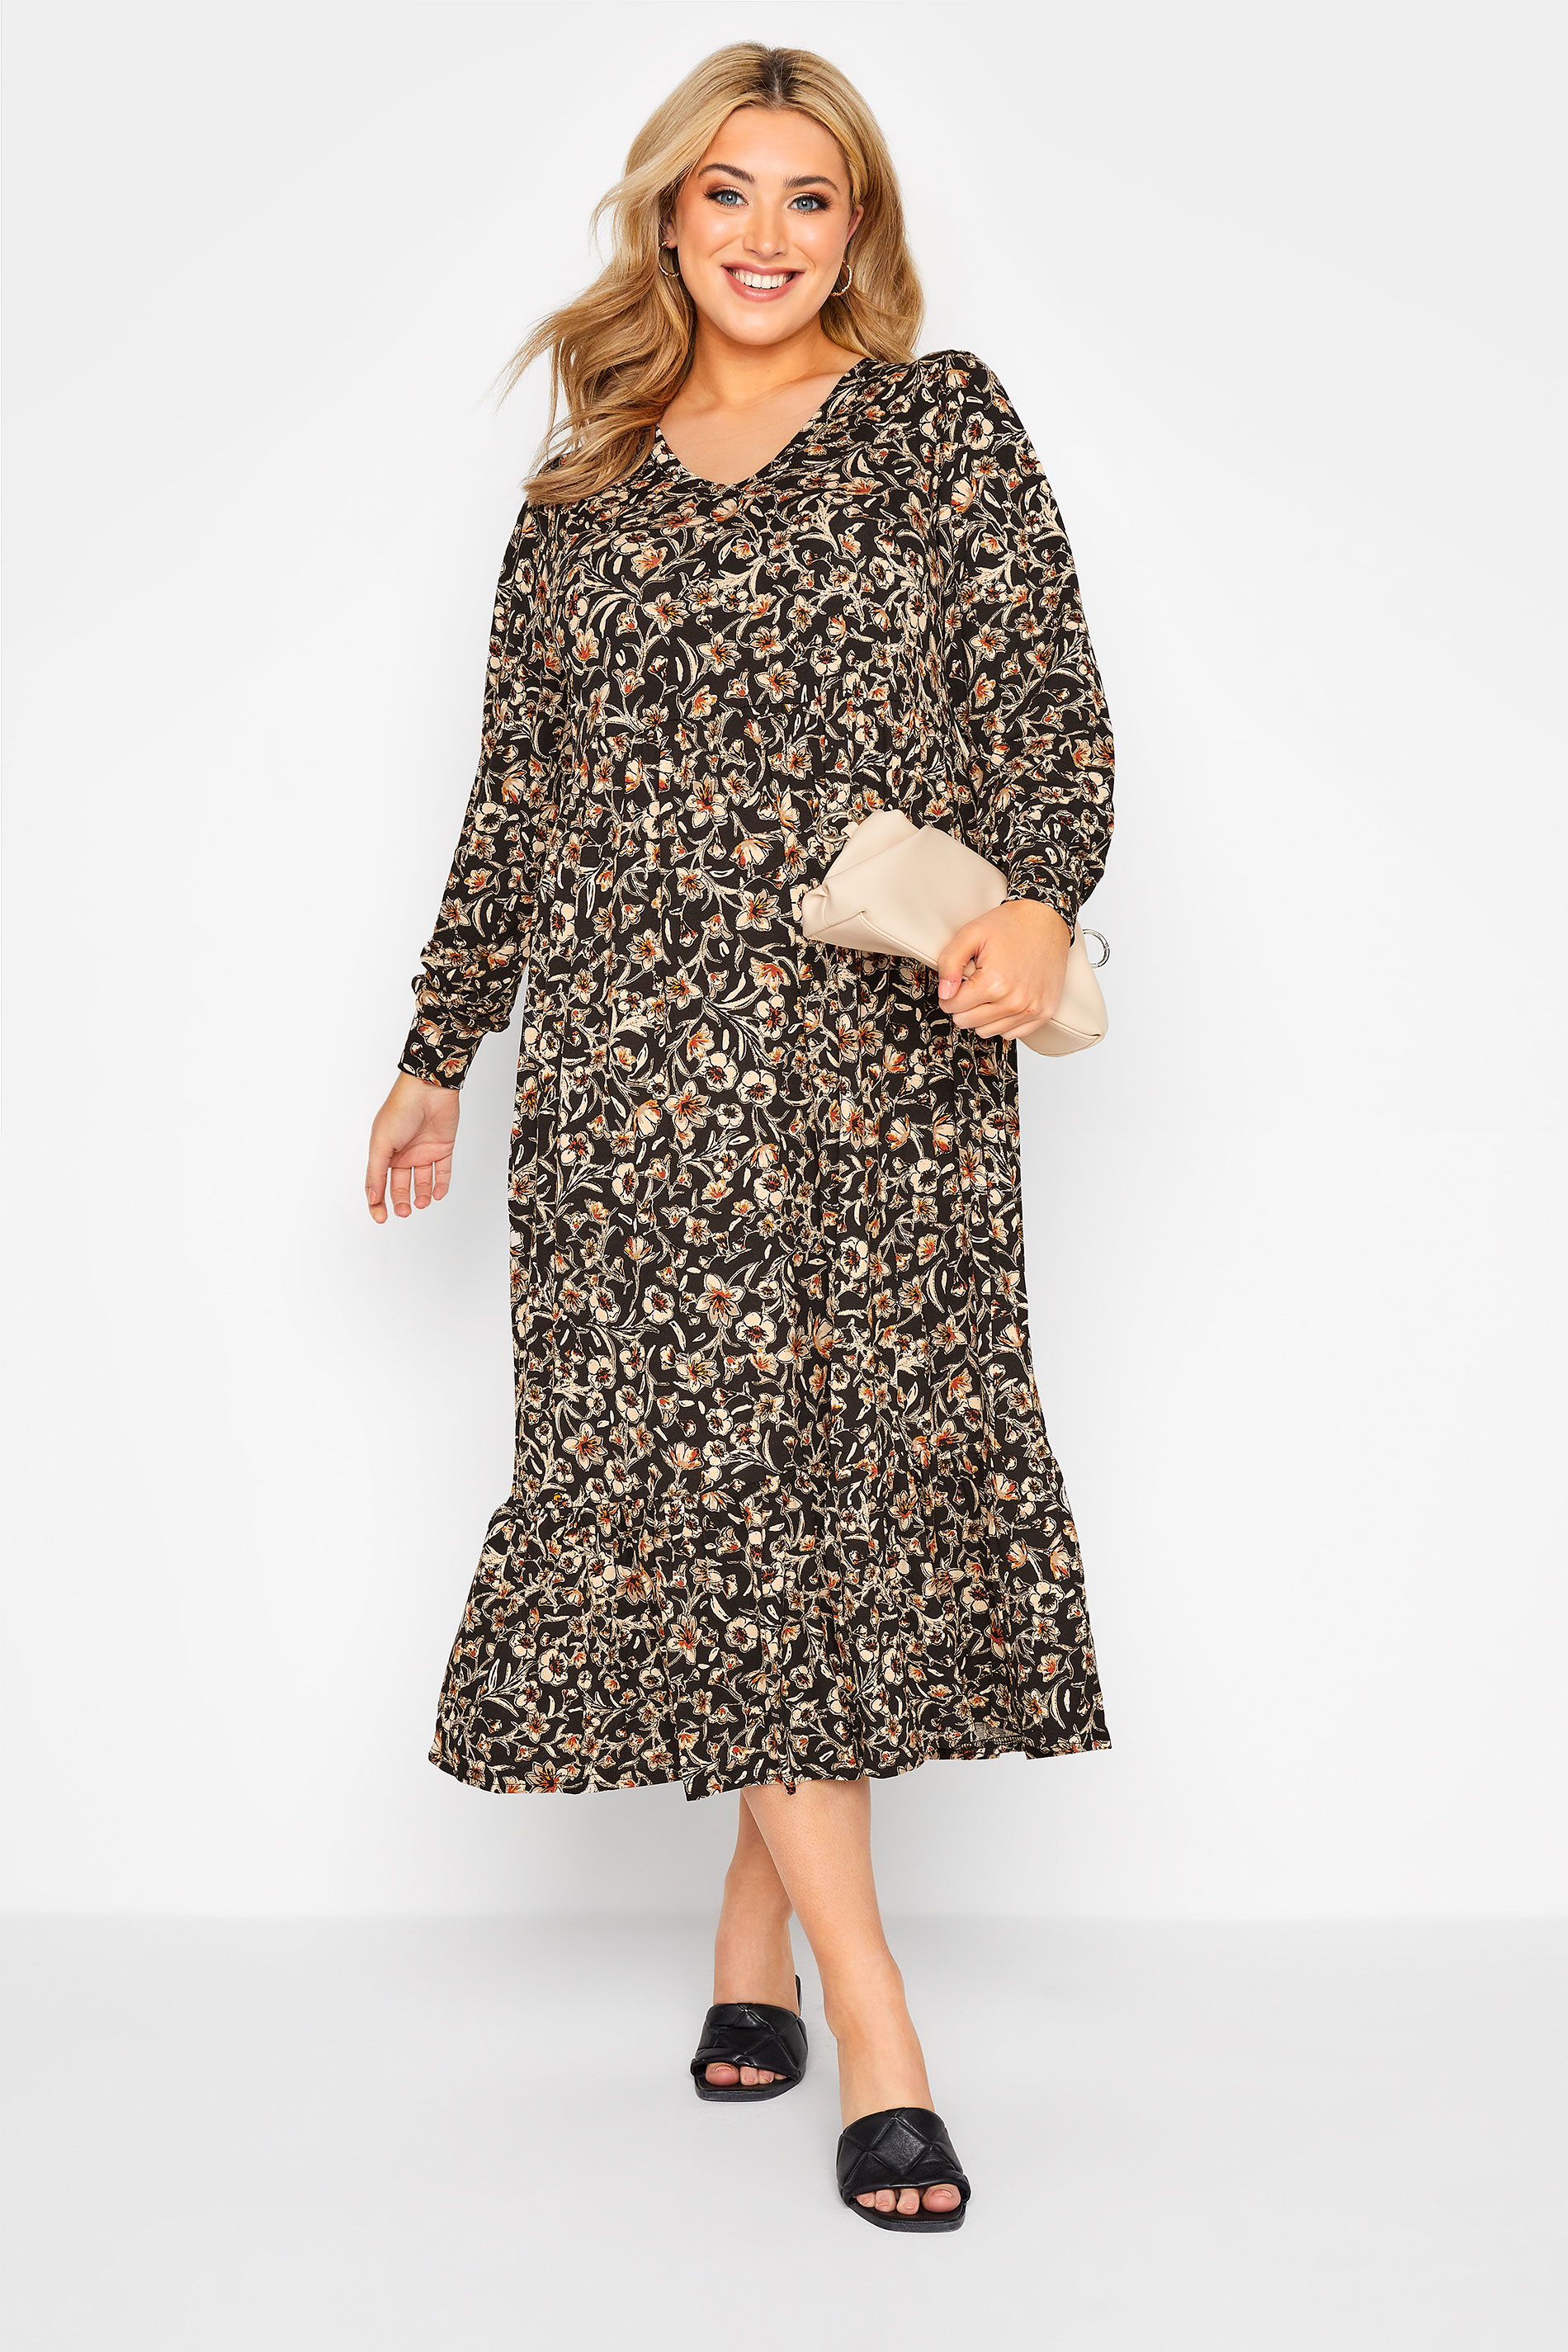 Robes Grande Taille Grande taille  Robes Manches Longues | LIMITED COLLECTION - Robe Noire Floral Volanté - DJ41354